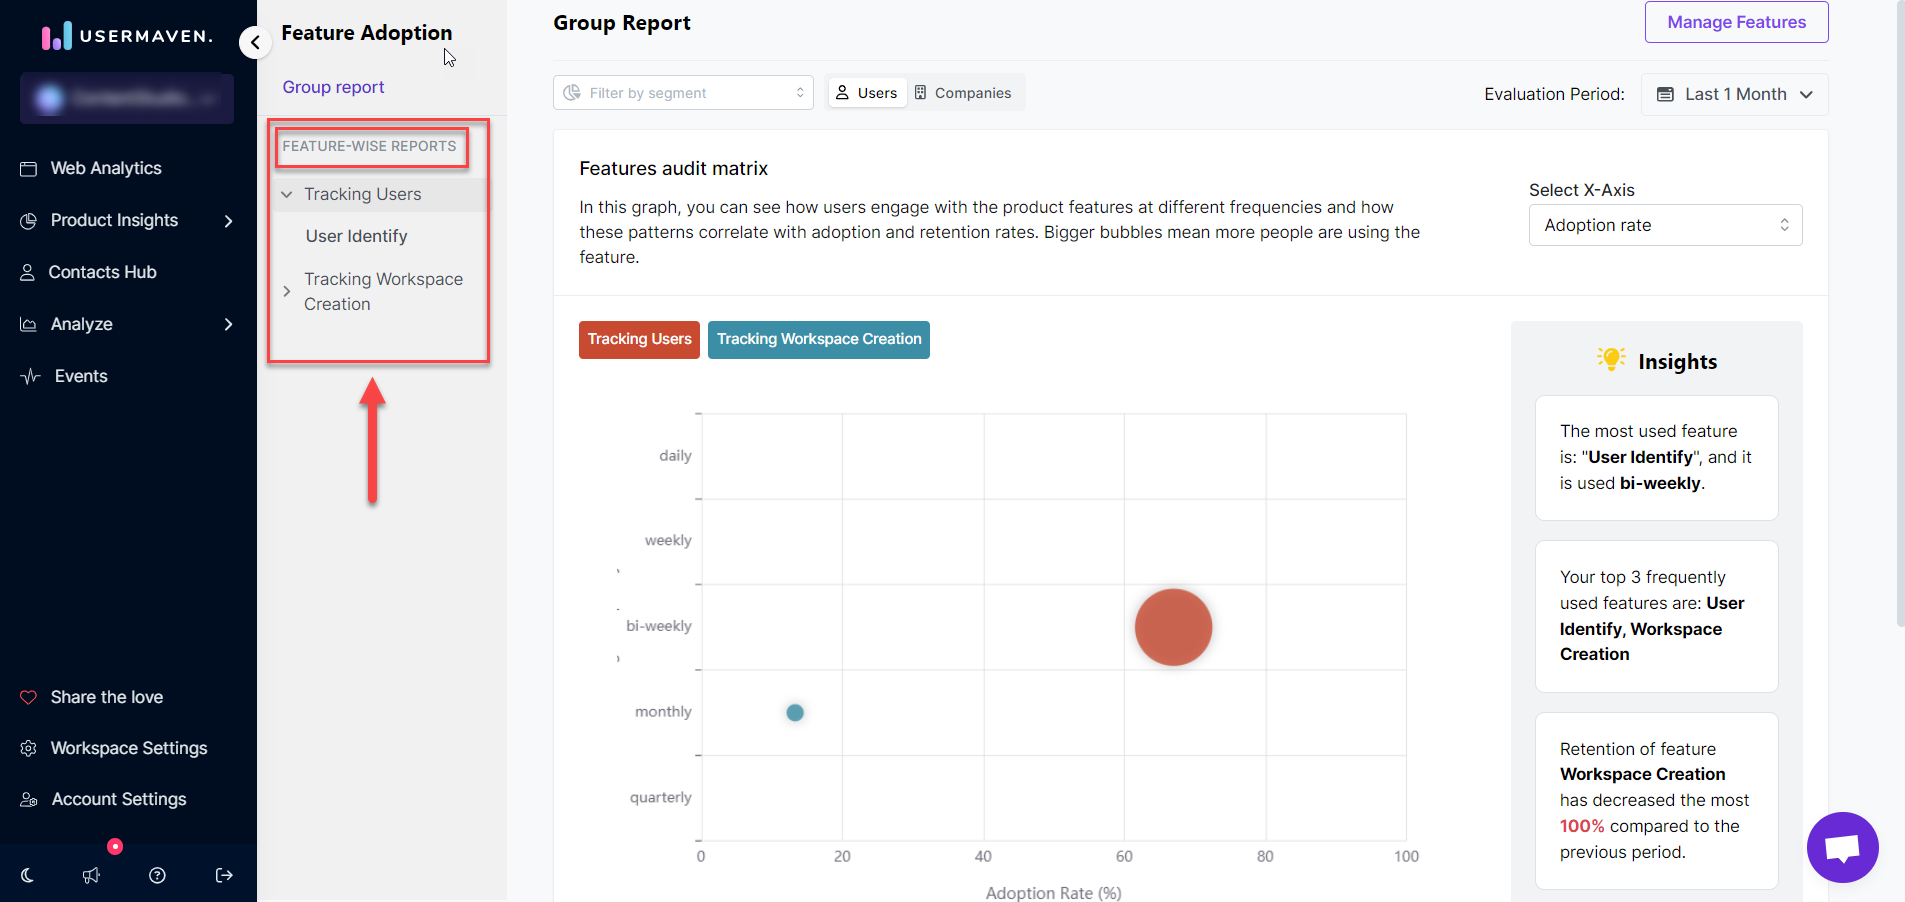 Feature-Wise Reports 